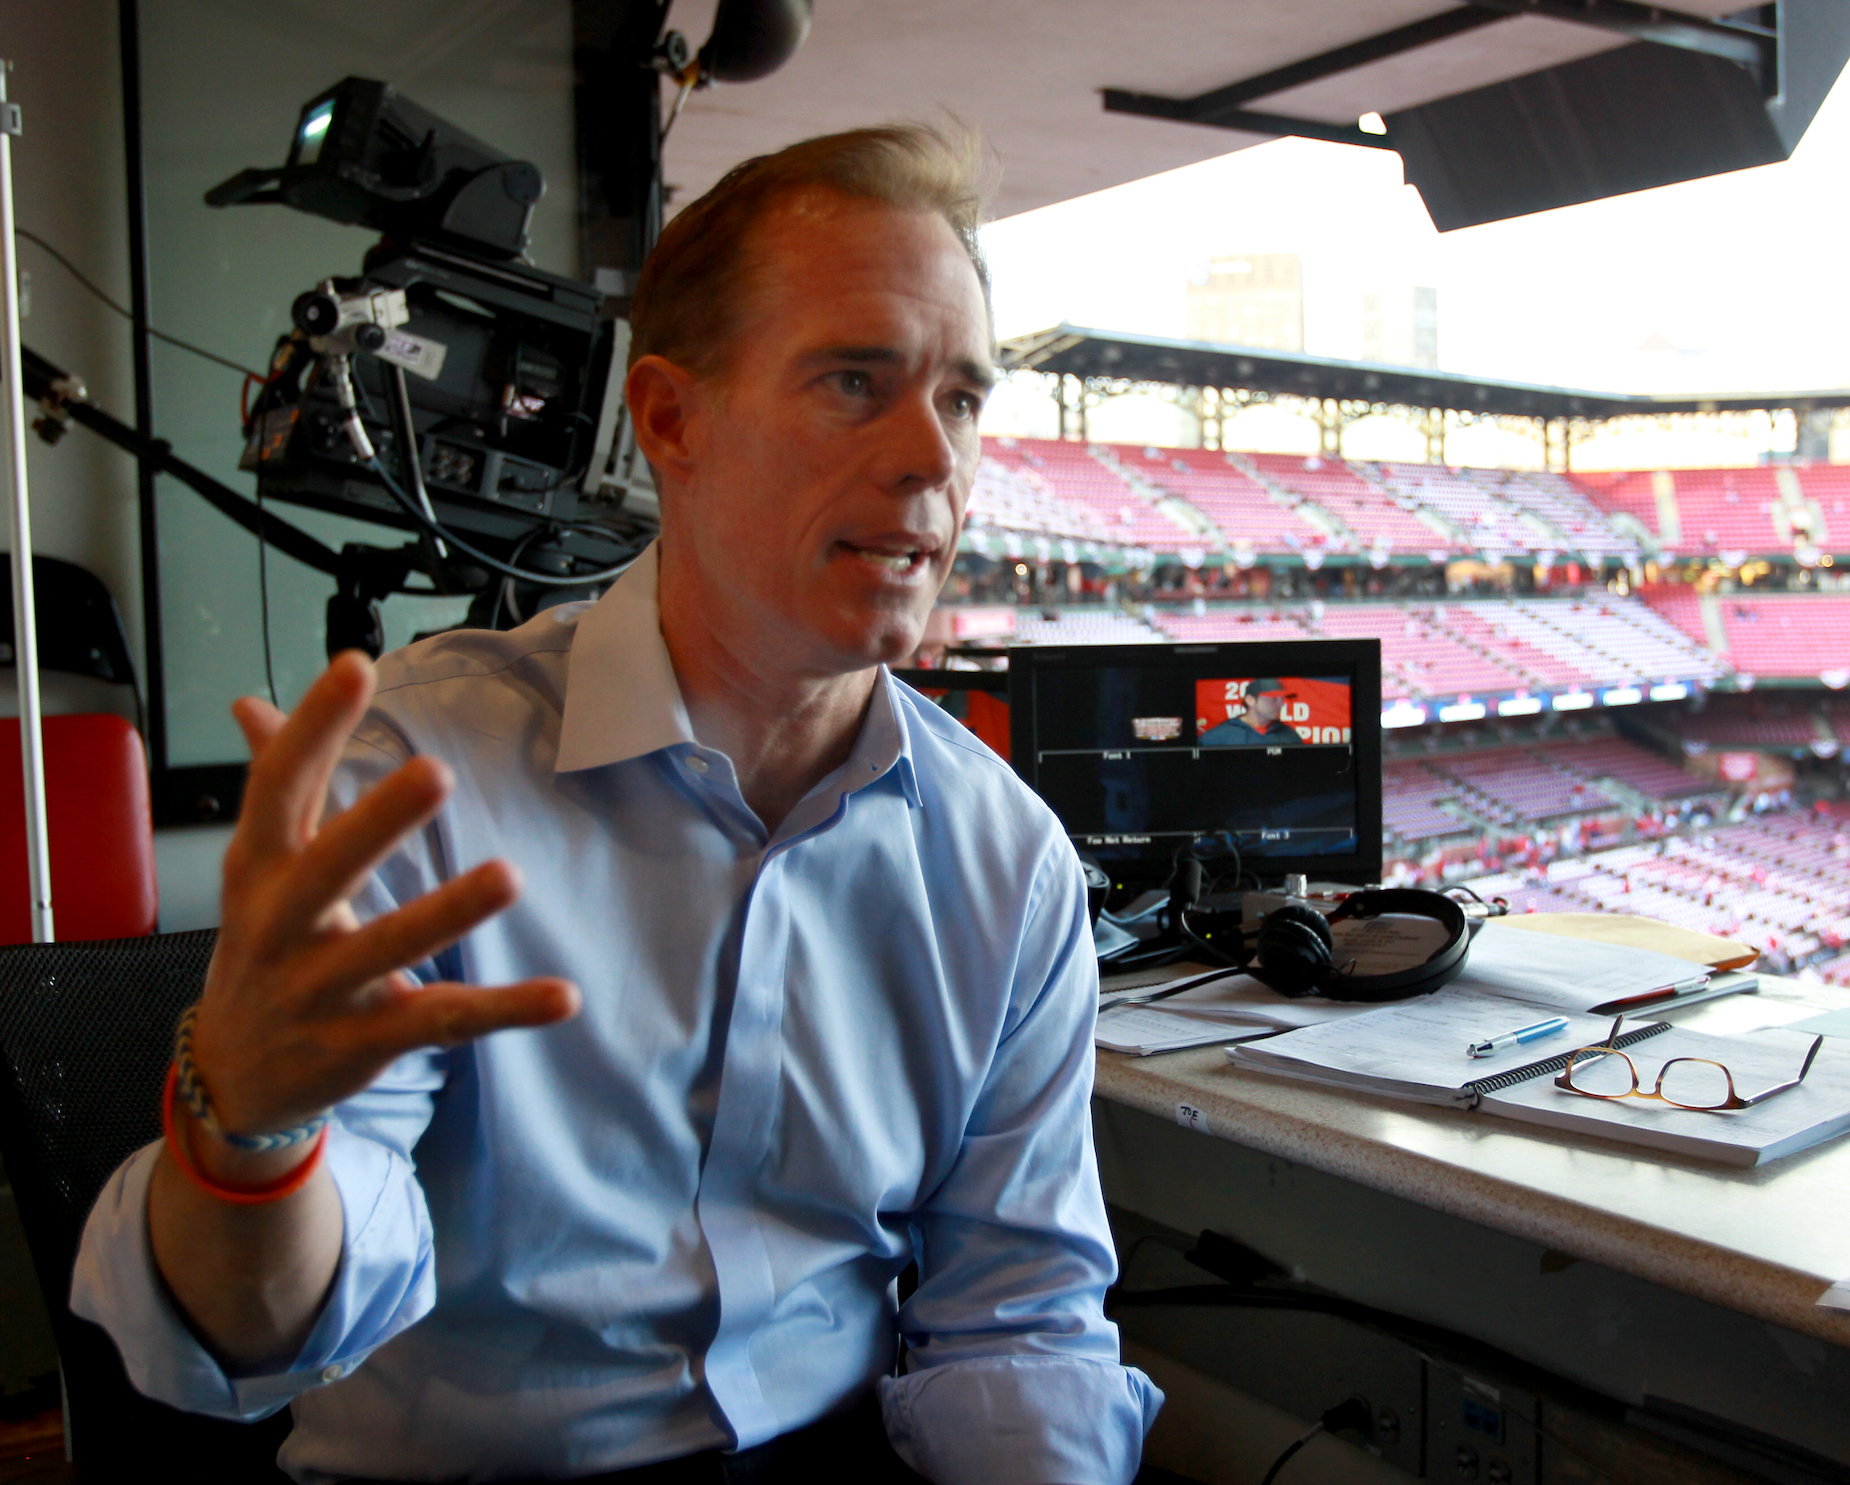 When he's feeling the heat during the Super Bowl or World Series, Joe Buck relies on a simple strategy to keep things in perspective.